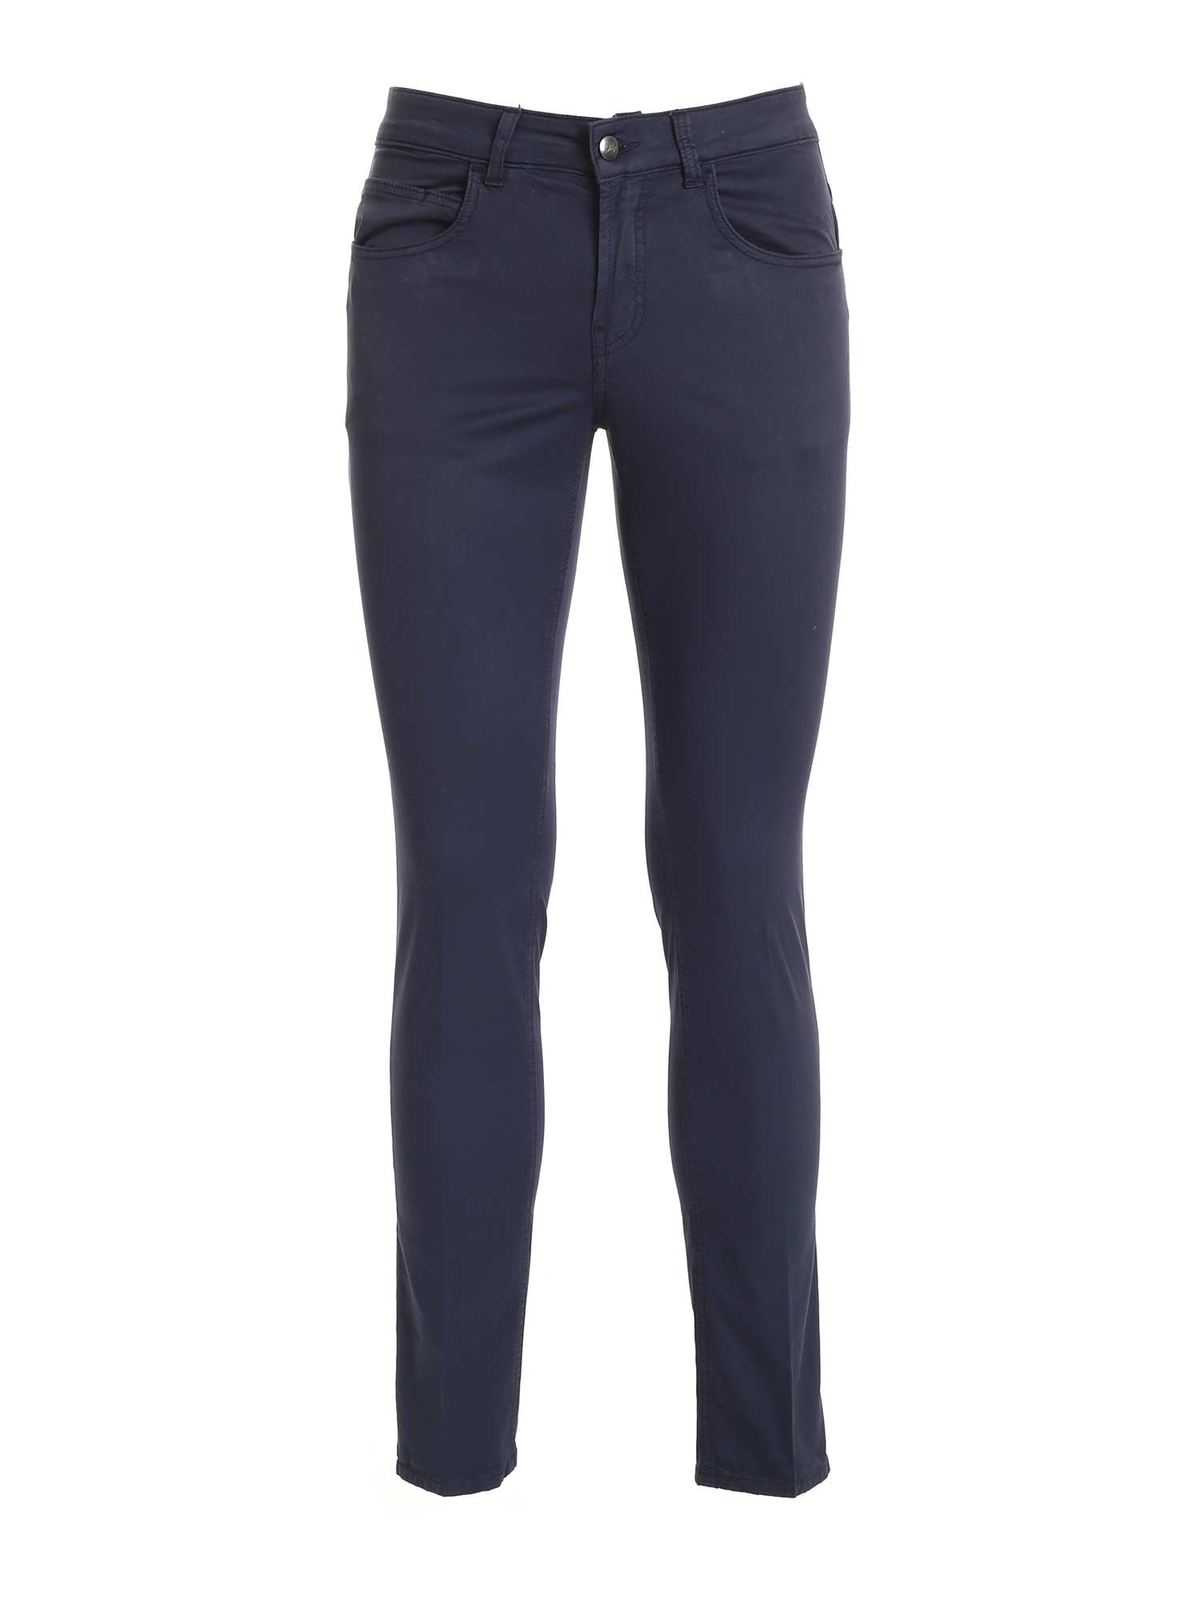 FAY 5-POCKET trousers IN BLUE